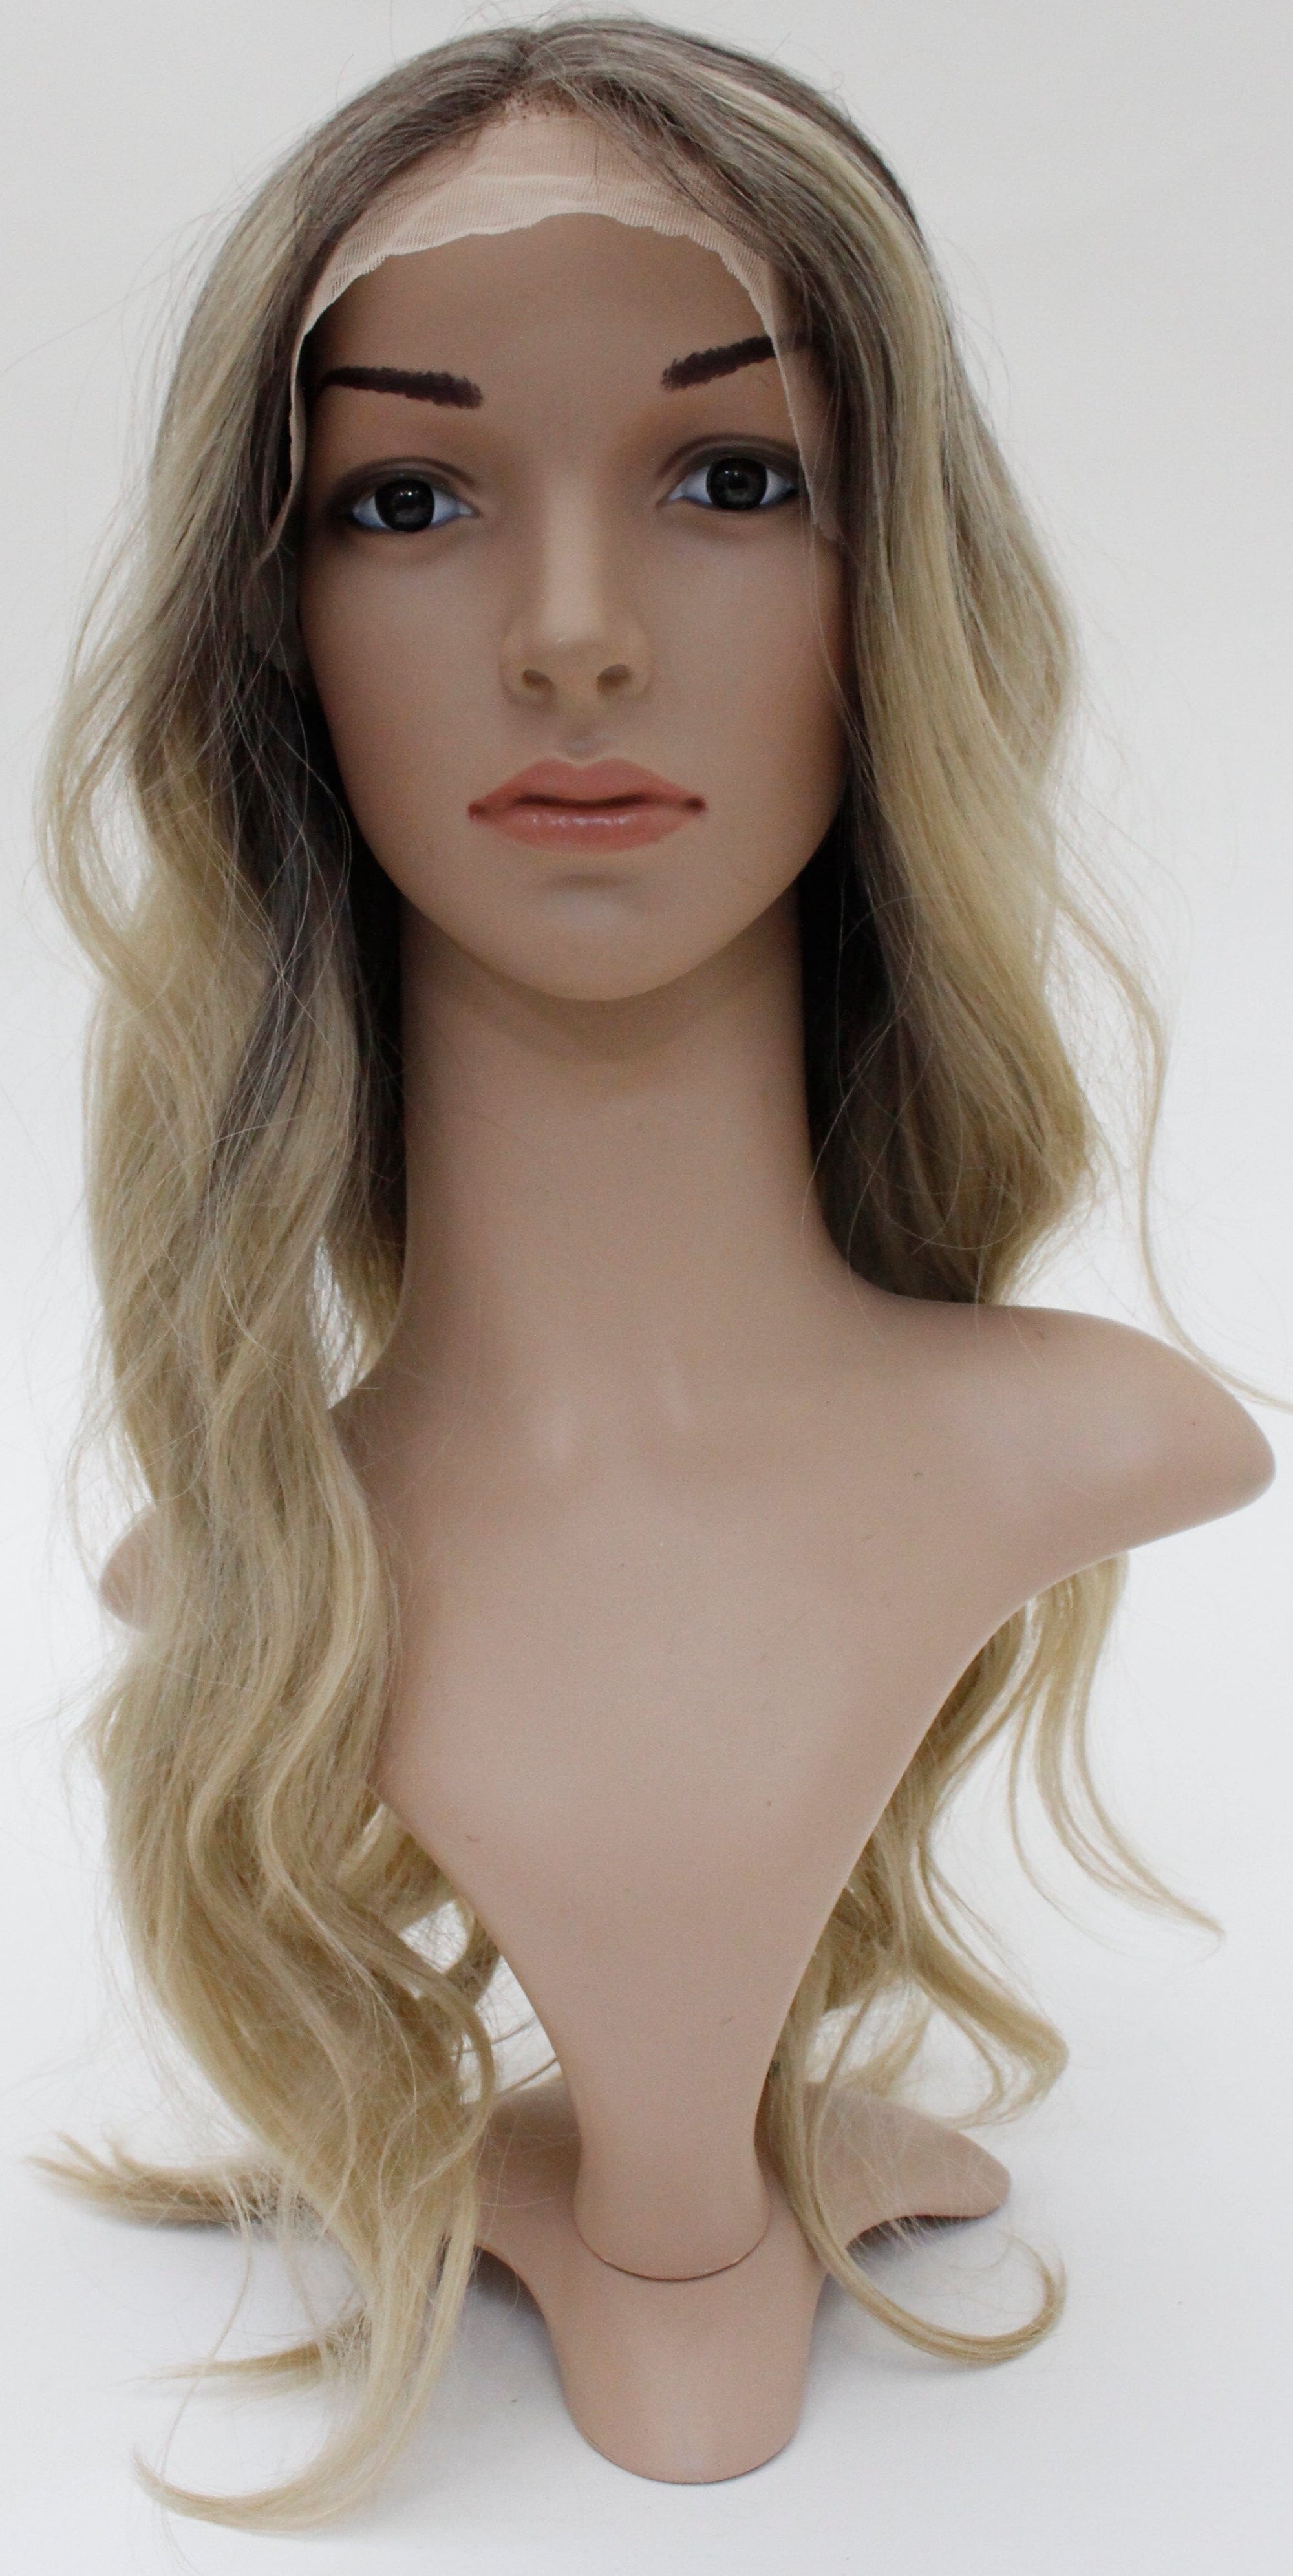 LACE FRONT- Wavy Blonde Ombre